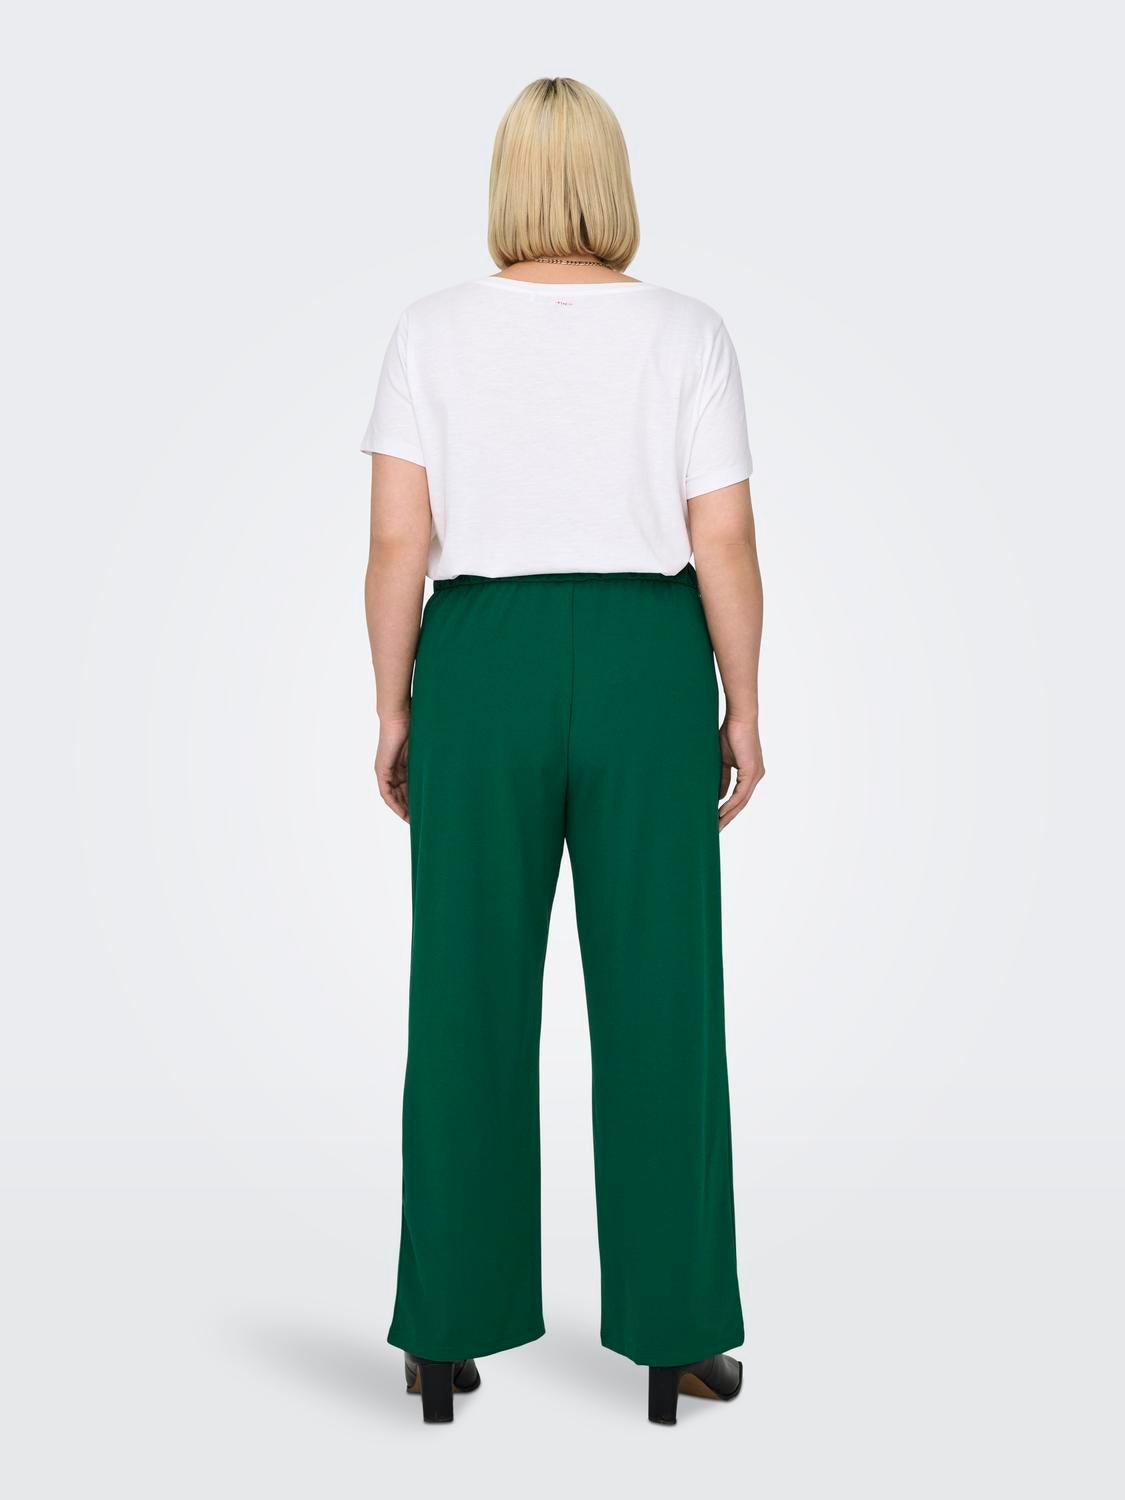 ONLY Curvy pull-up pants -Aventurine - 15293196